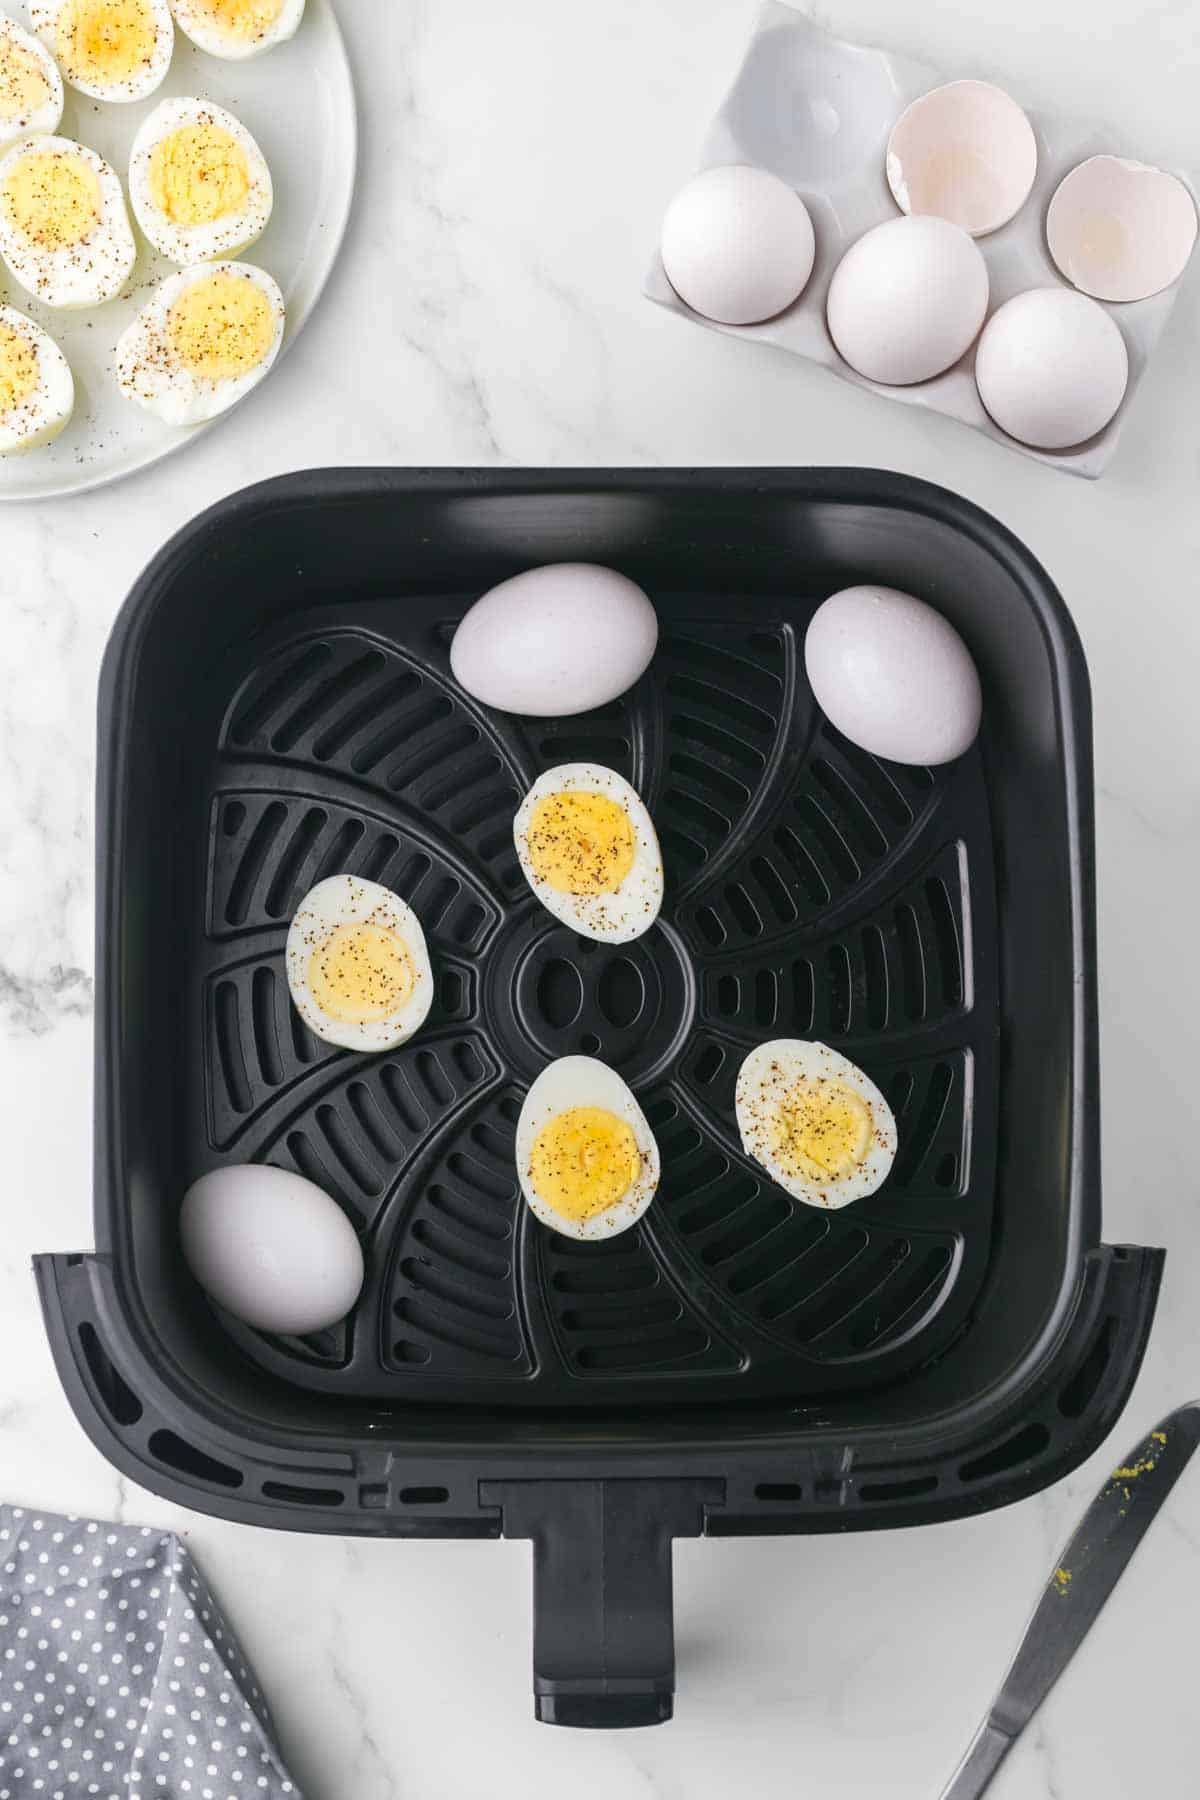 air fryer basket image with some whole eggs and some hard boiled eggs seasoned and cut in half